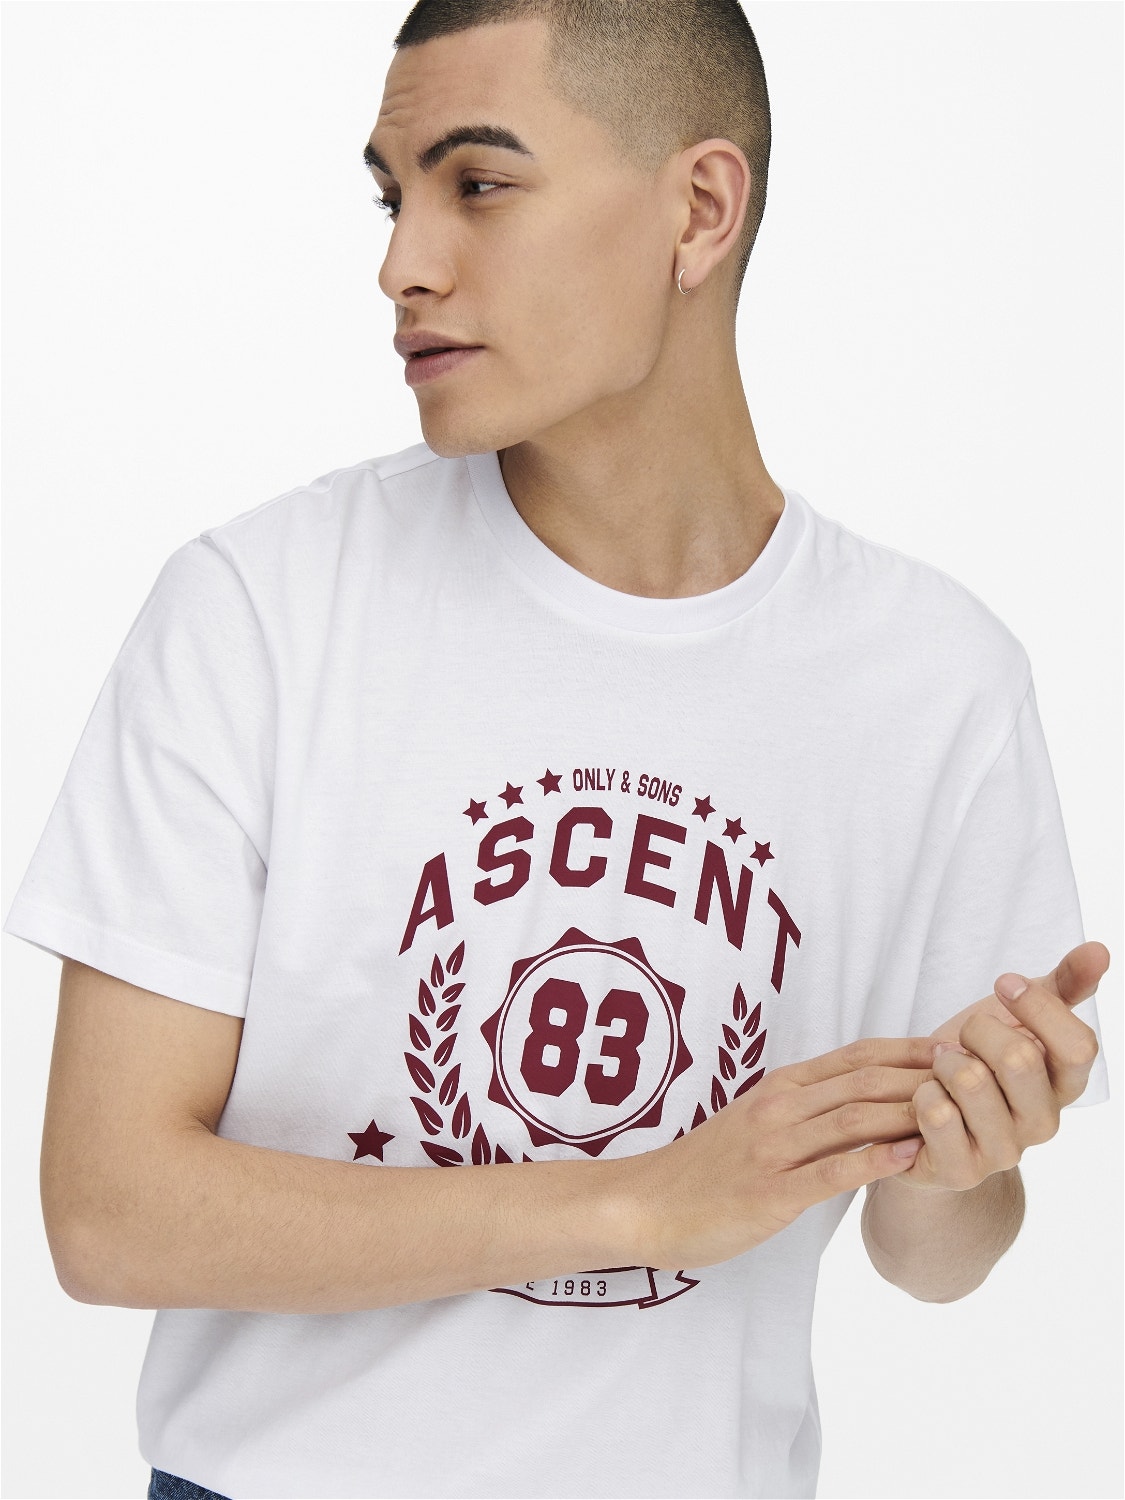 ONLY & SONS O-hals t-shirt med print -Bright White - 22022196